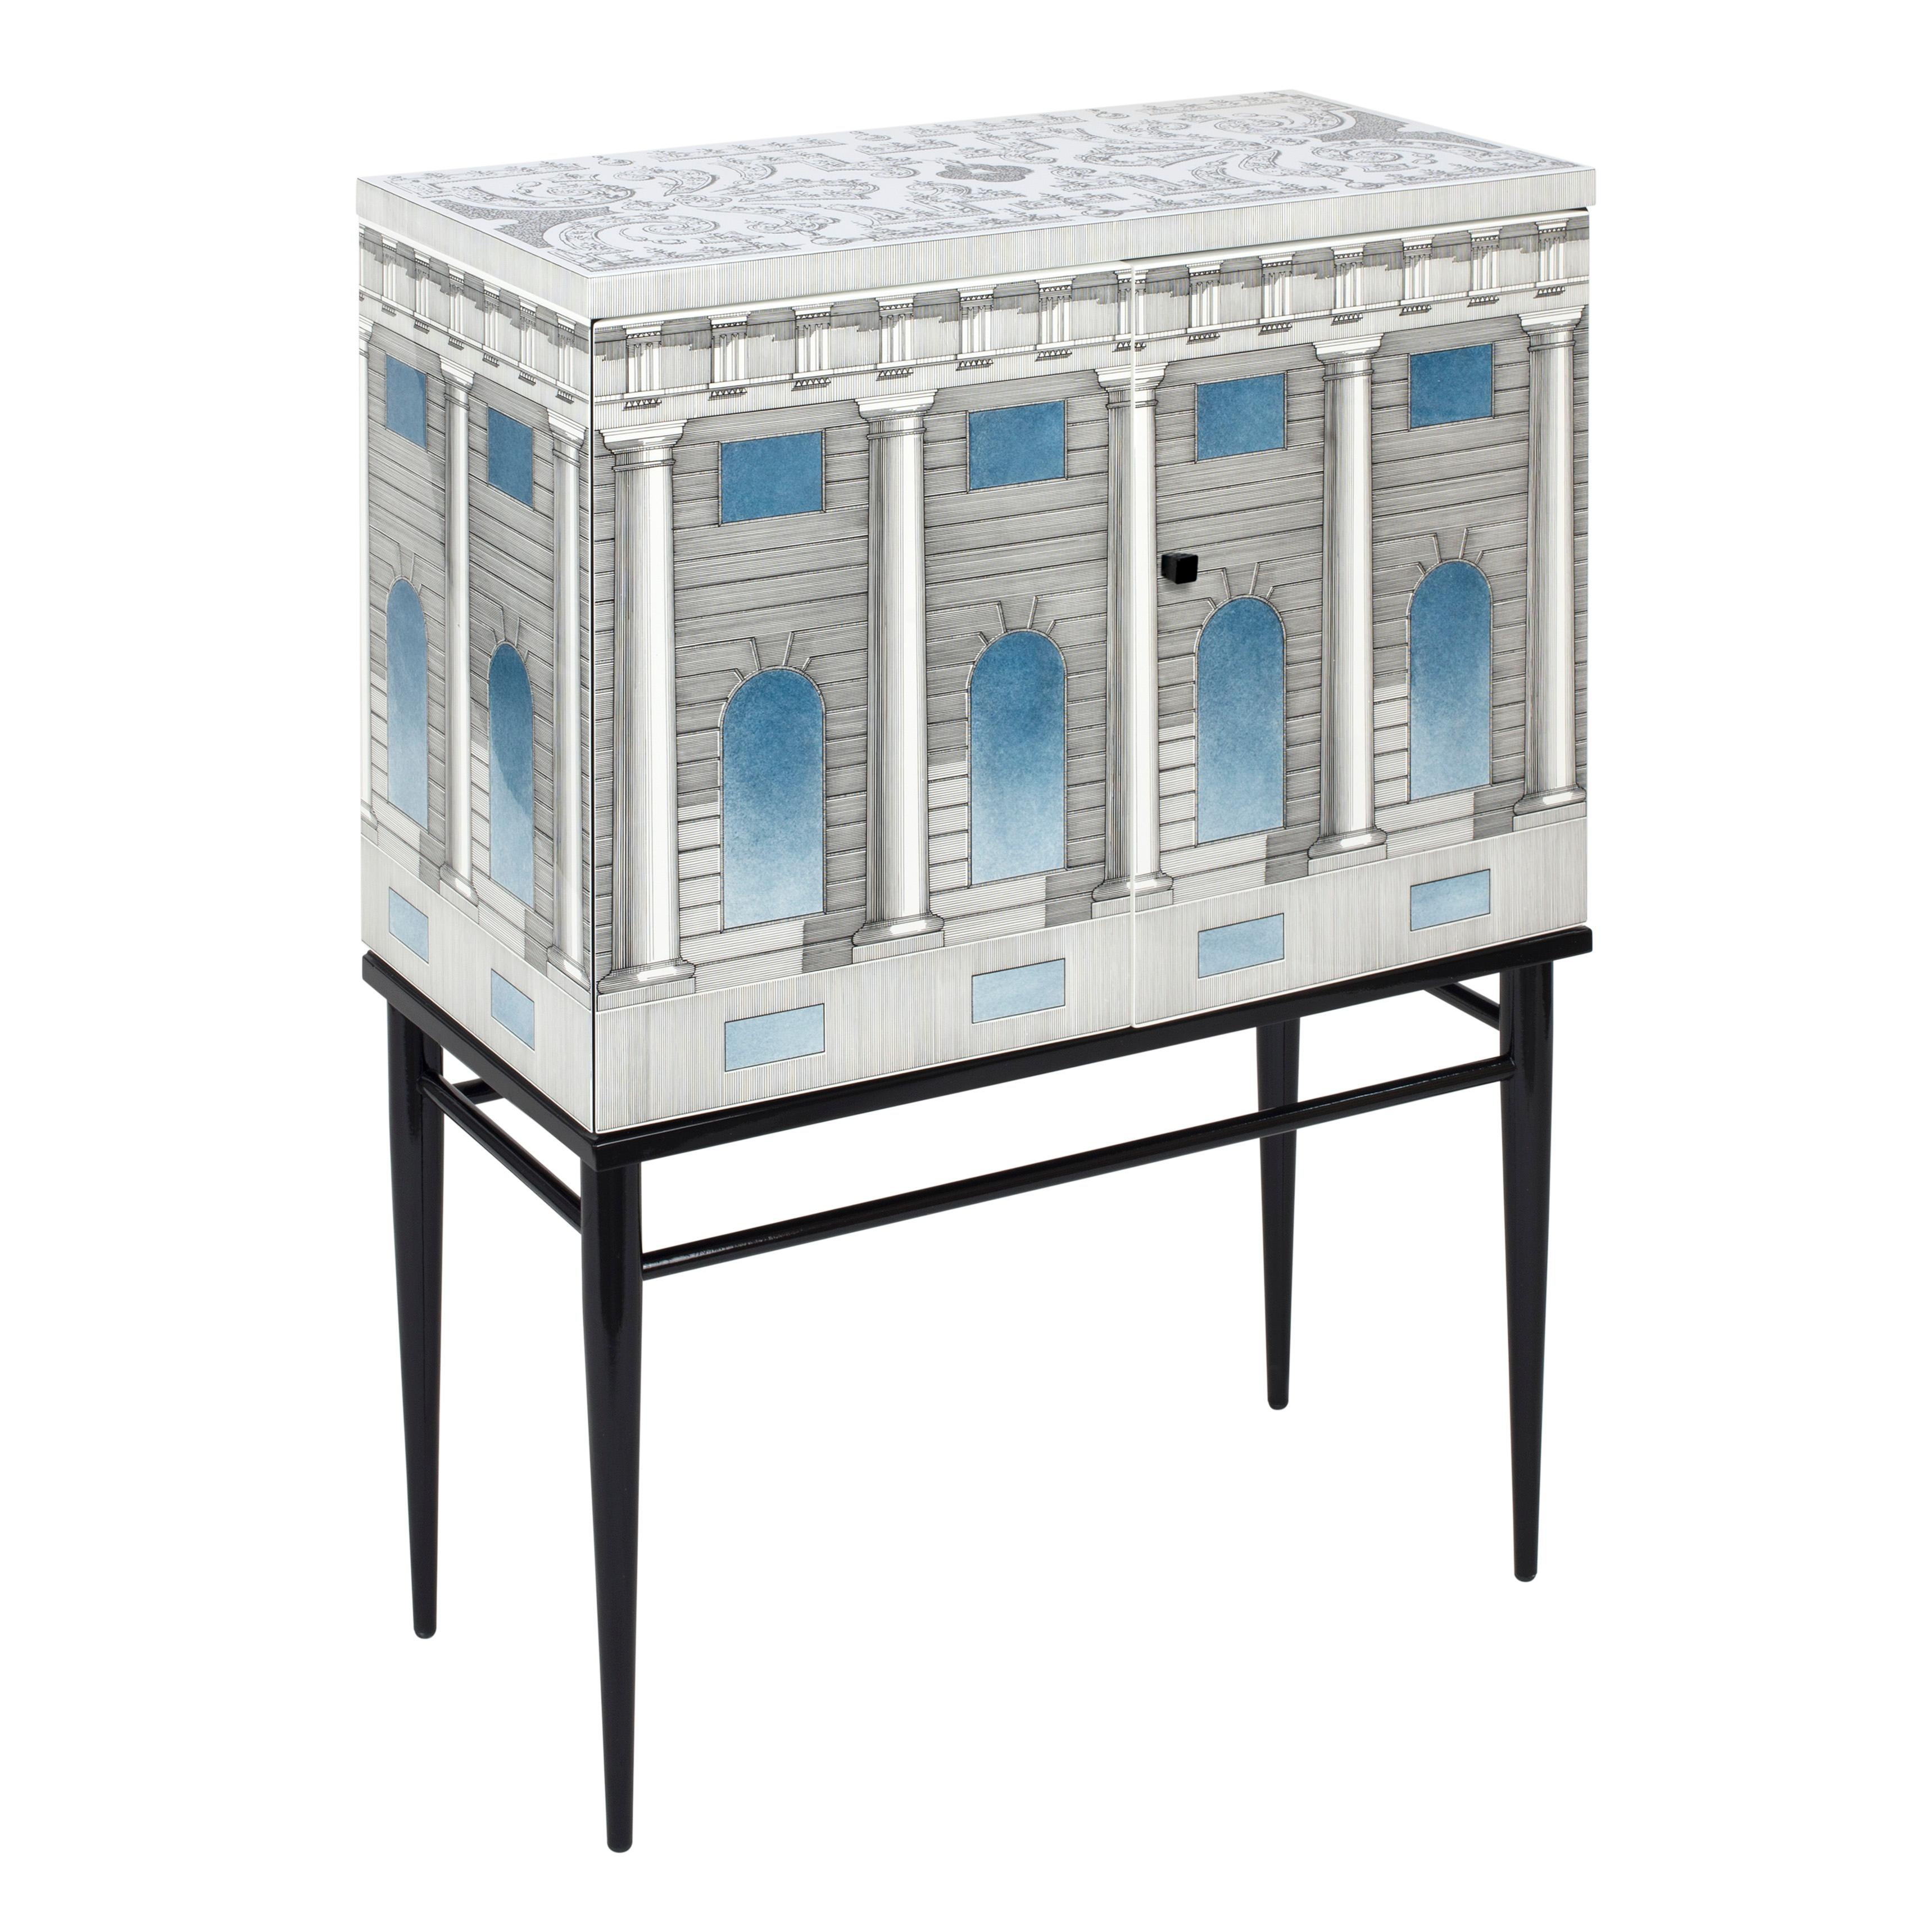 The sideboard cabinet is handcrafted using original artisan techniques, like all Fornasetti pieces of furniture
This cabinet is silk-screened by hand, hand-finished and covered with a smooth lacquer.

It is part of the Architettura Celeste